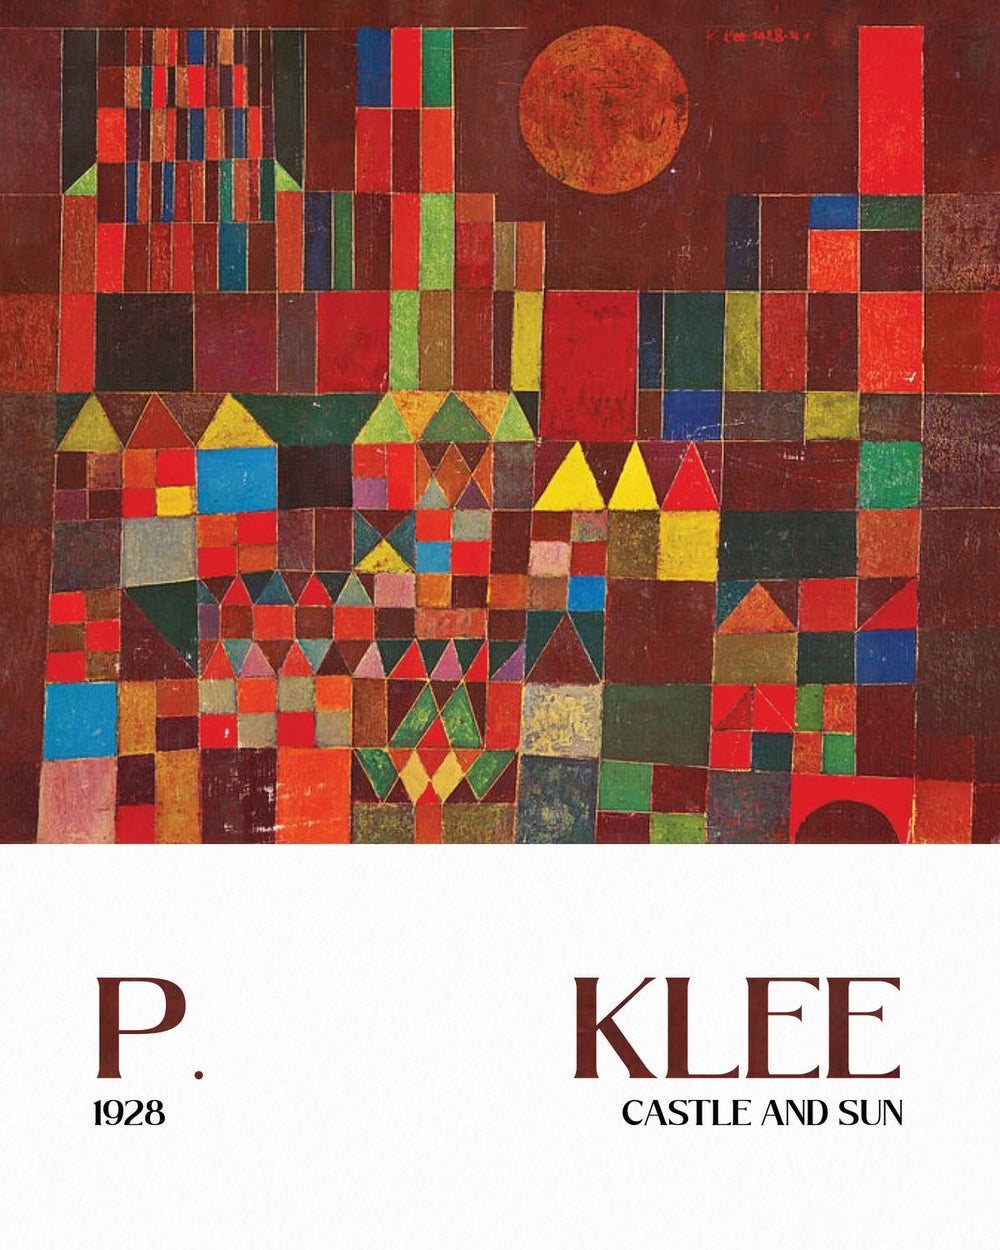 Castle And Sun Klee Exhibition Poster